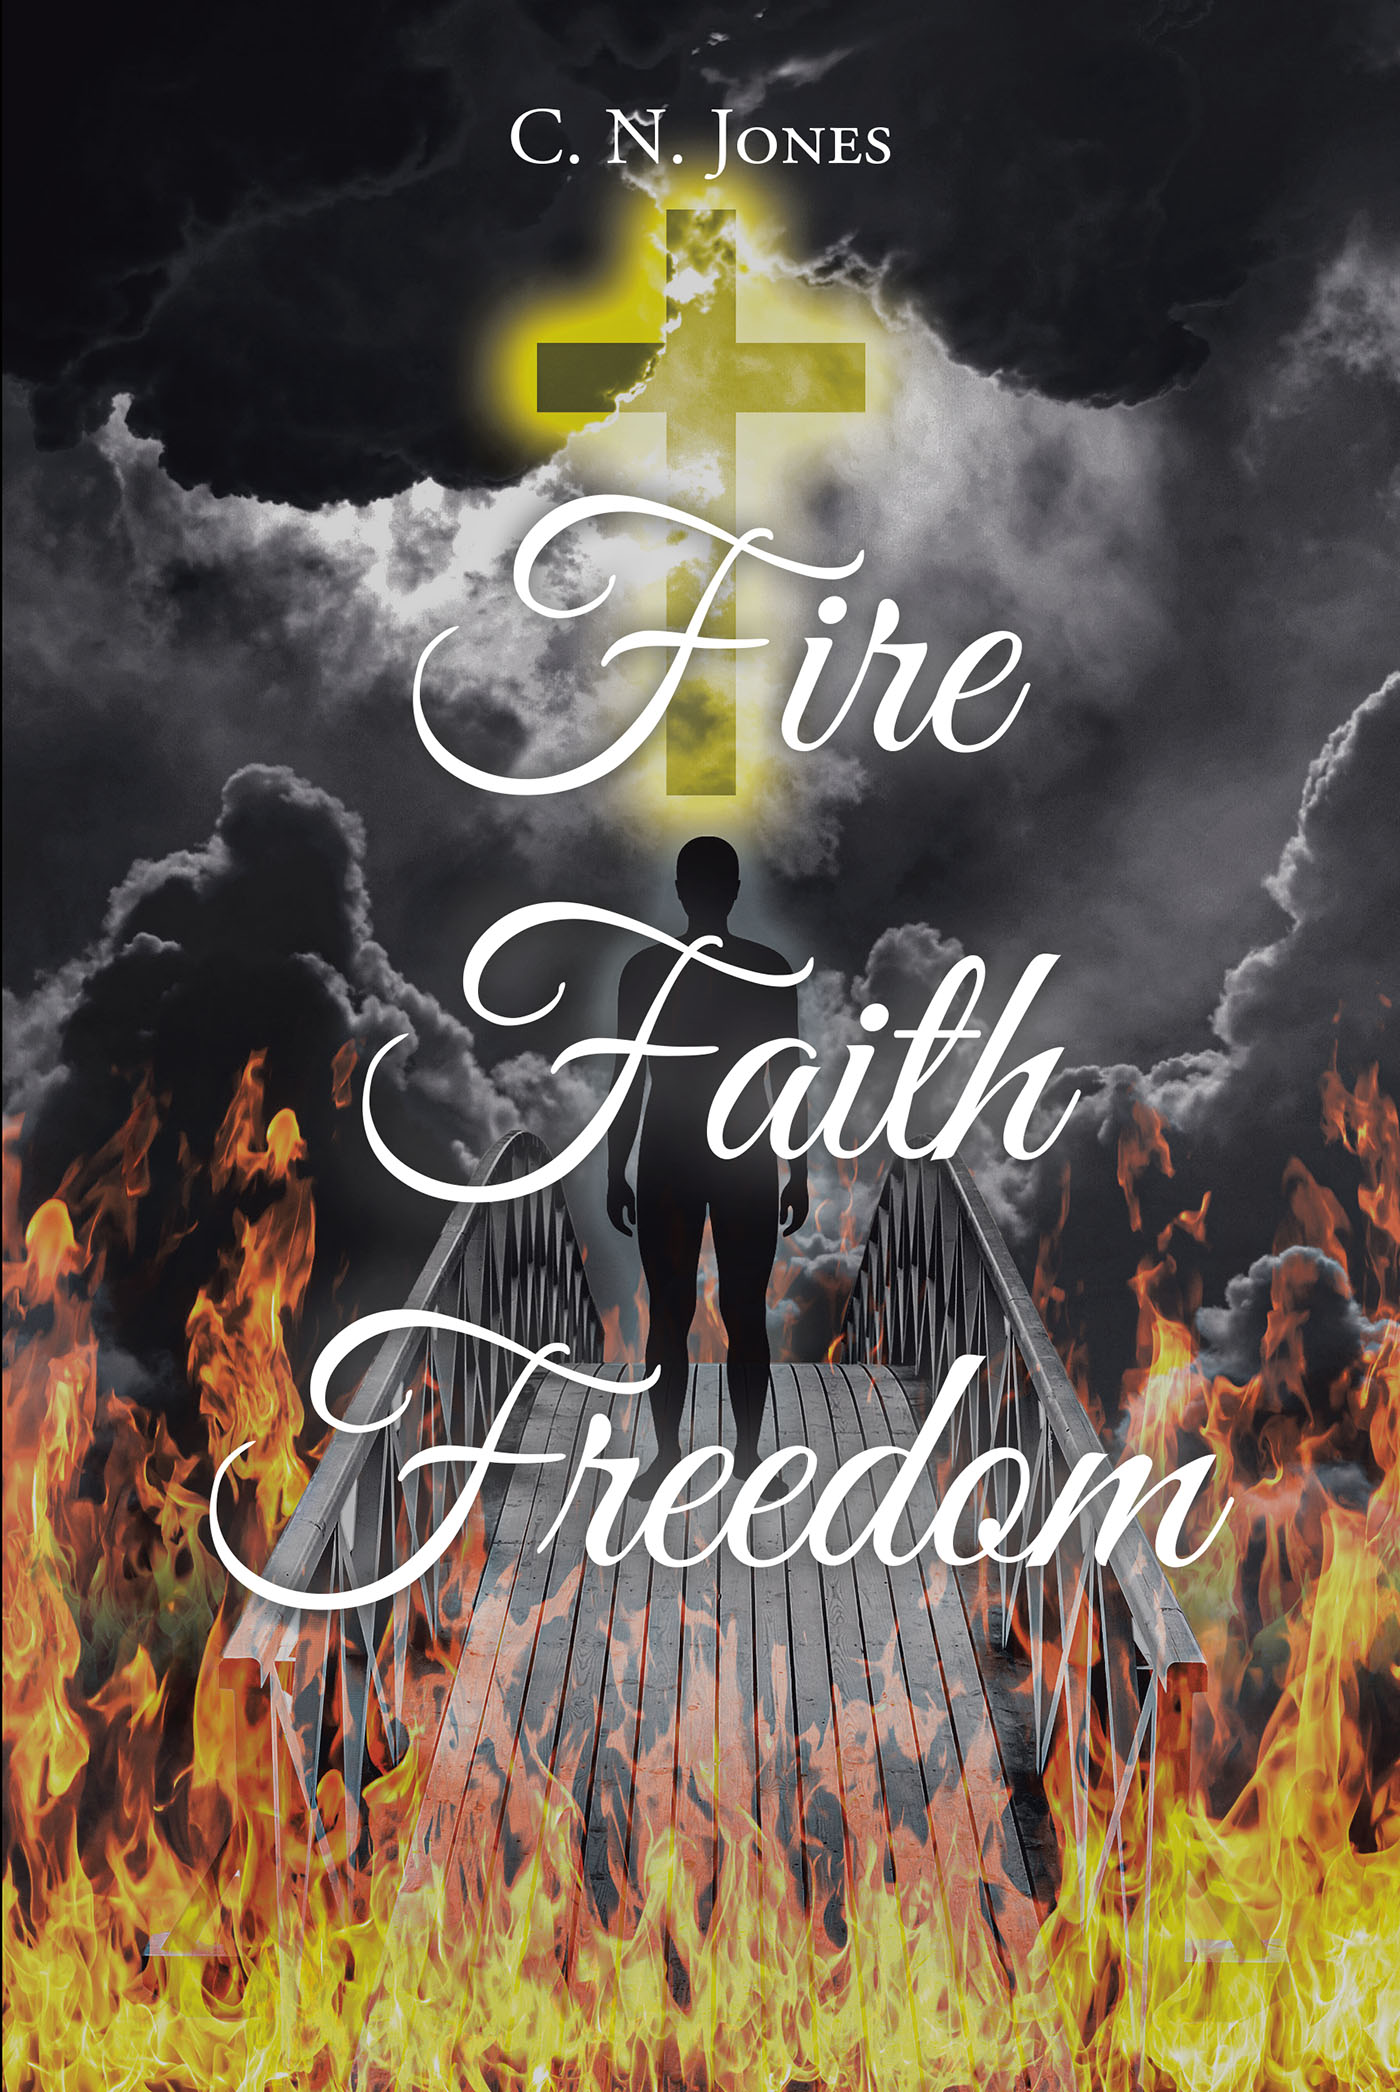 C. N. Jones’s Newly Released, "Fire Faith Freedom," is a Powerful Testimony That Explores One Woman’s Challenging Journey